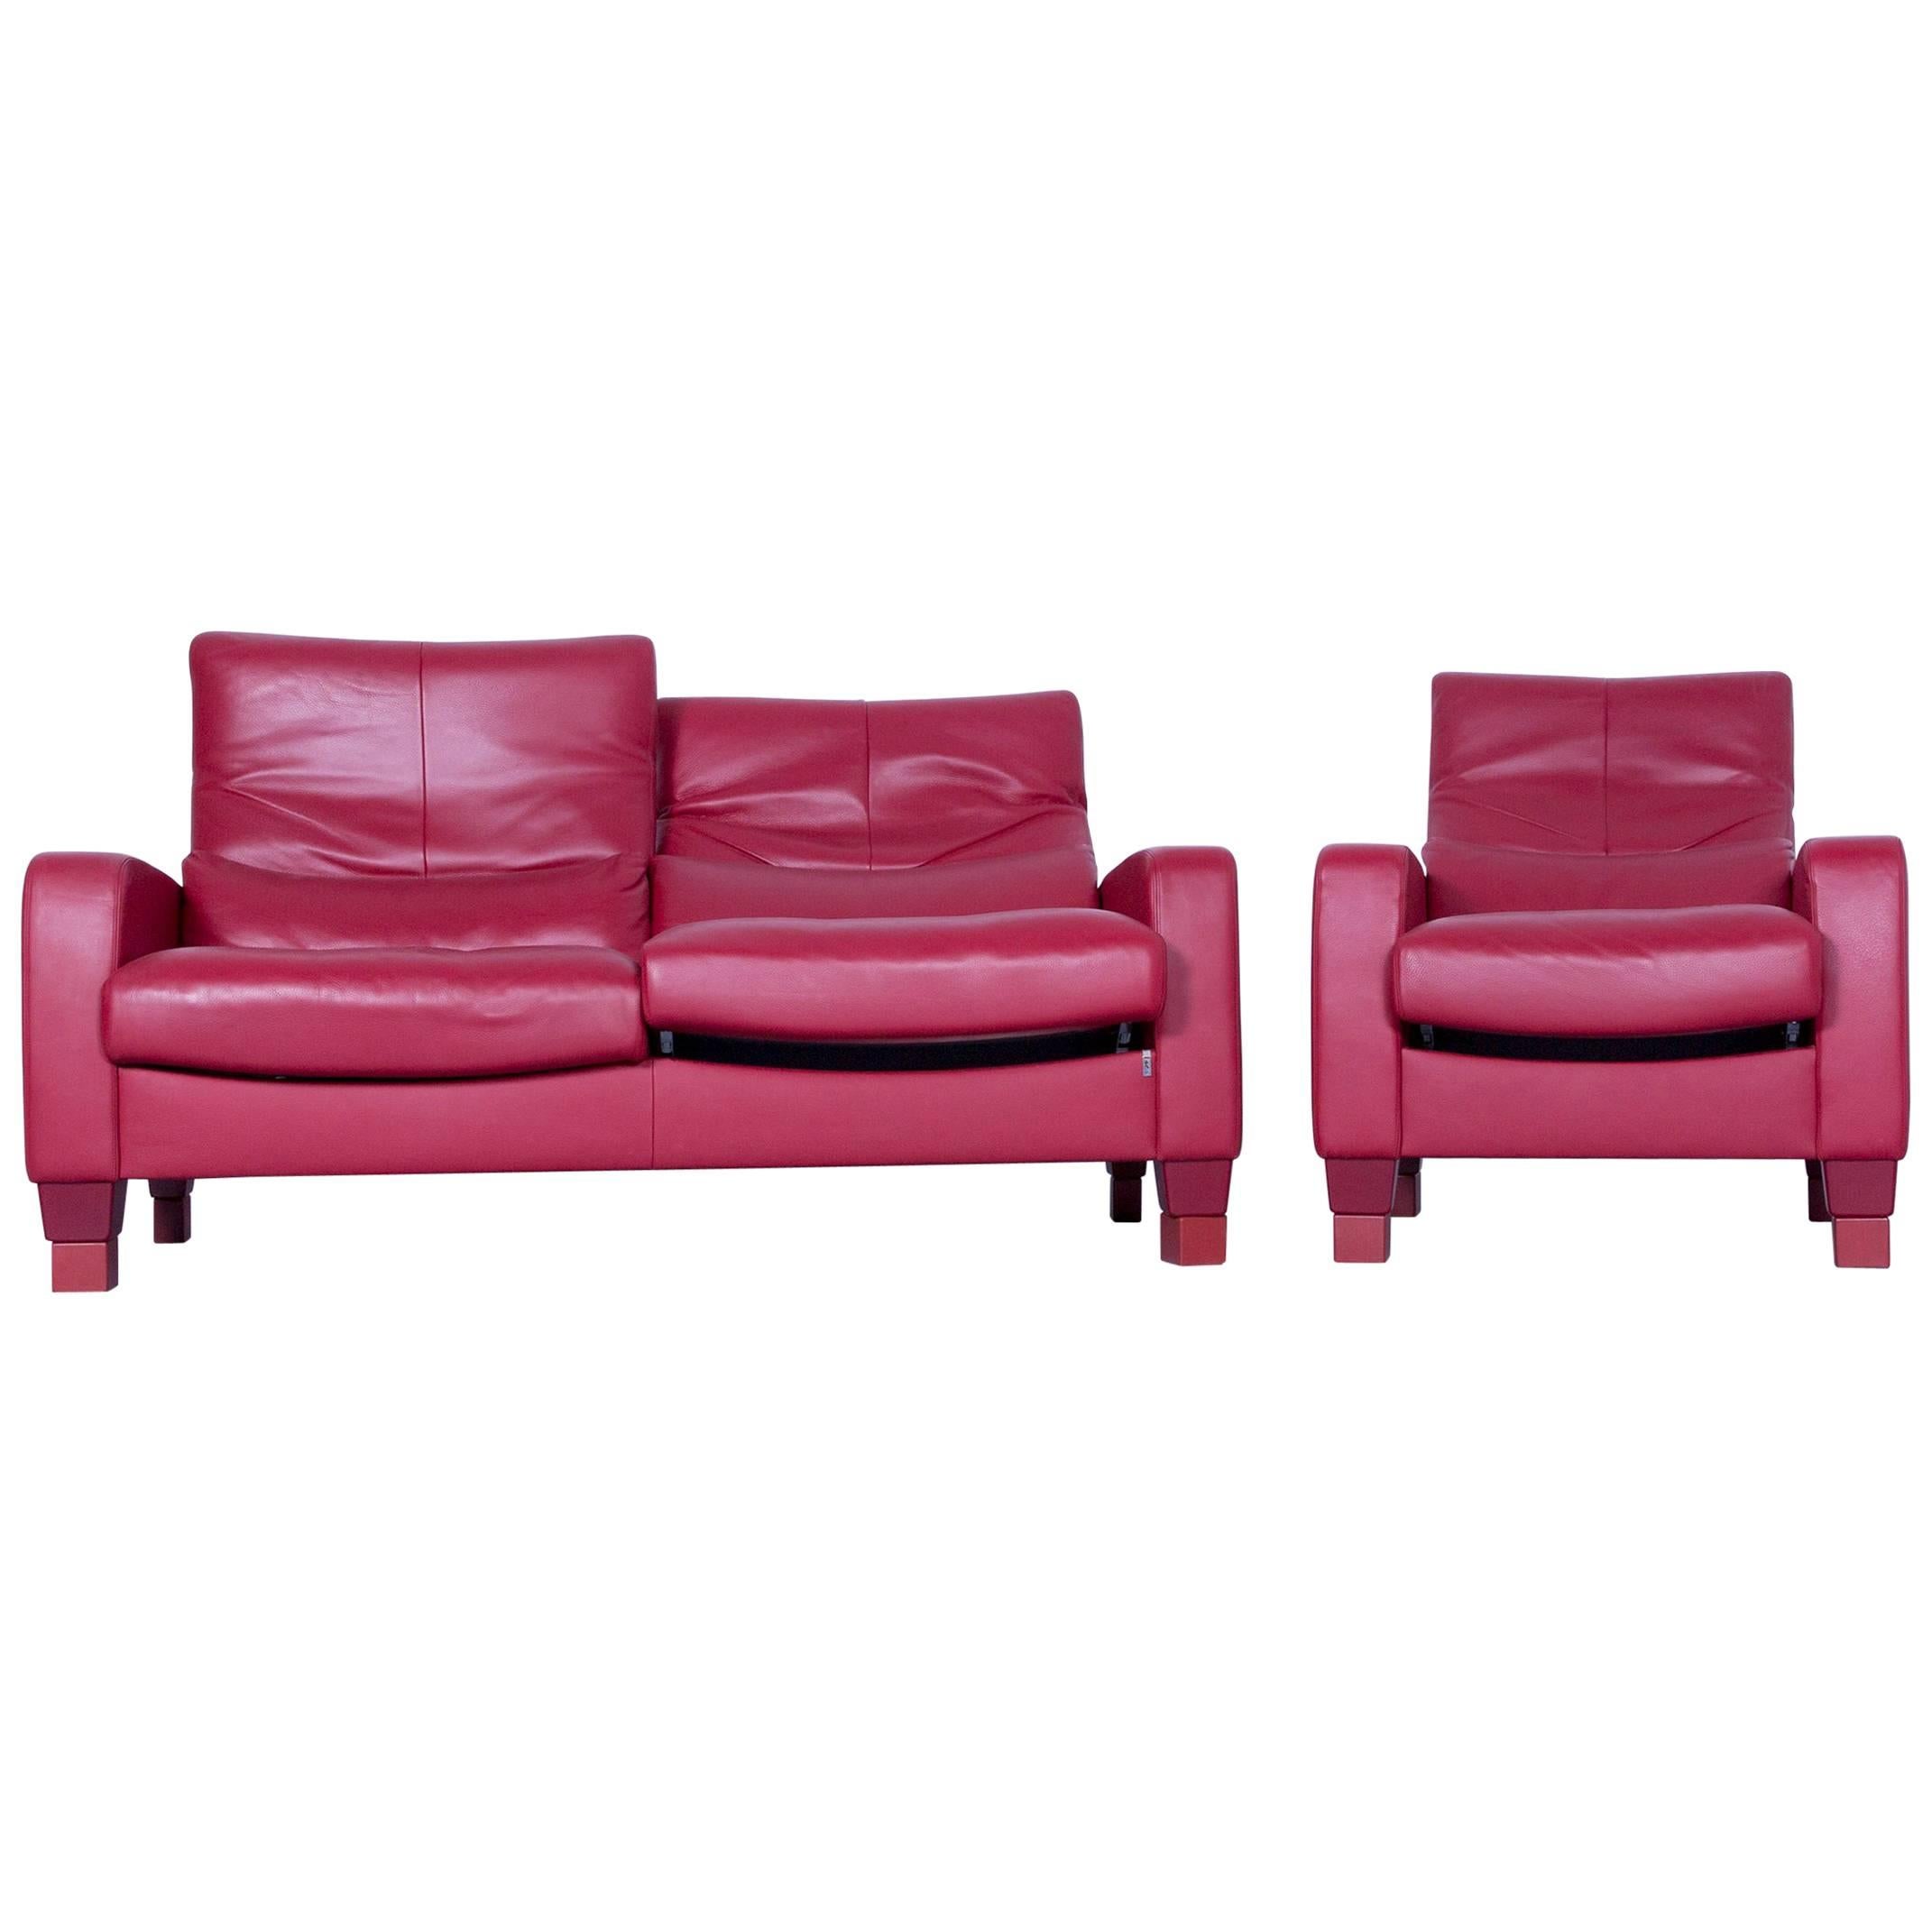 Erpo Designer Sofa Set Leather Red Two-Seat and Armchair Couch Recline Function